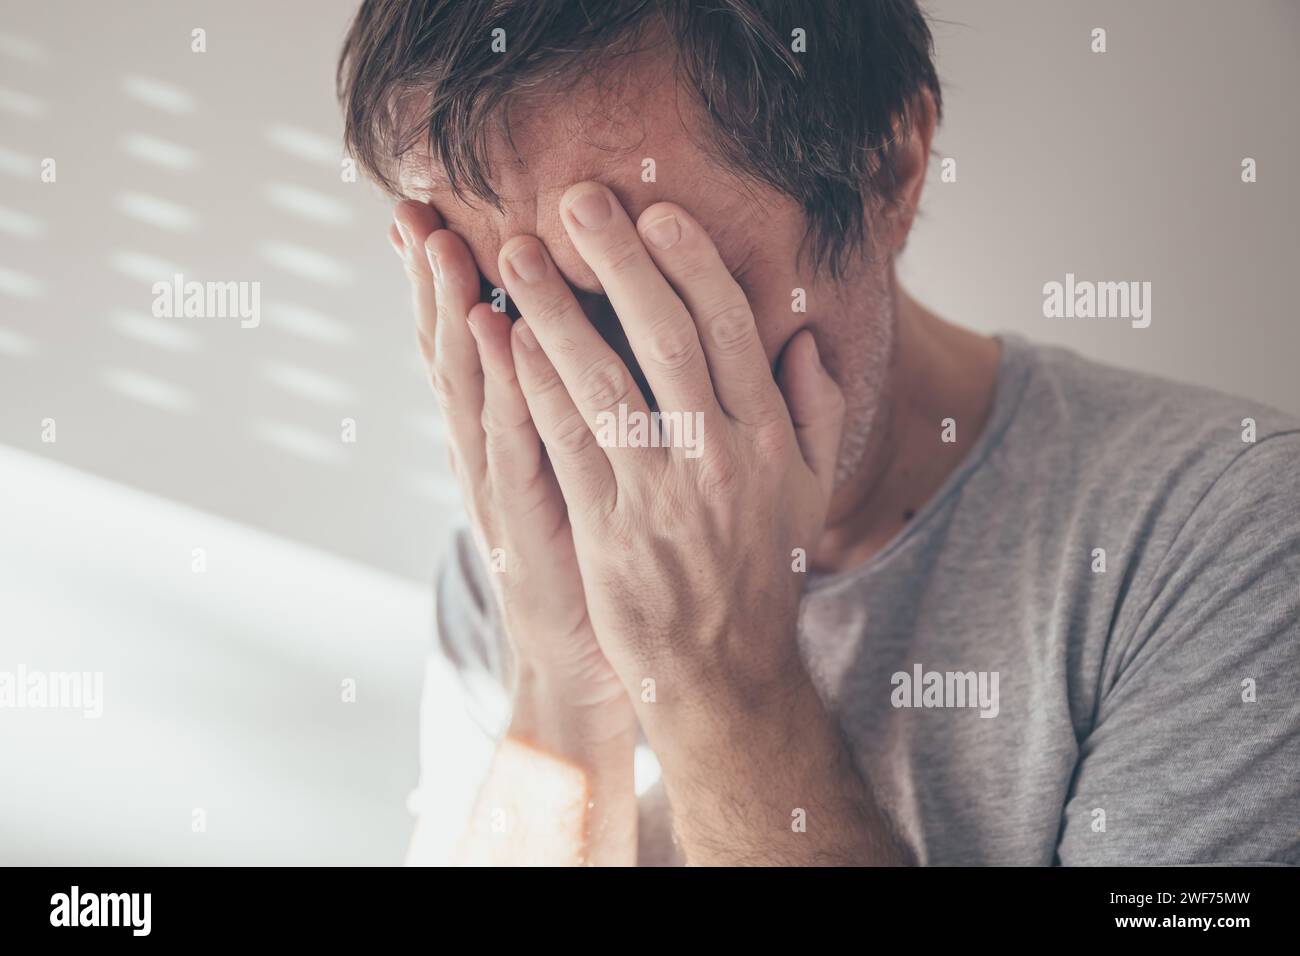 Despair concept, complete loss or absence of hope. Adult caucasian male covering face and crying desperately, selective focus Stock Photo